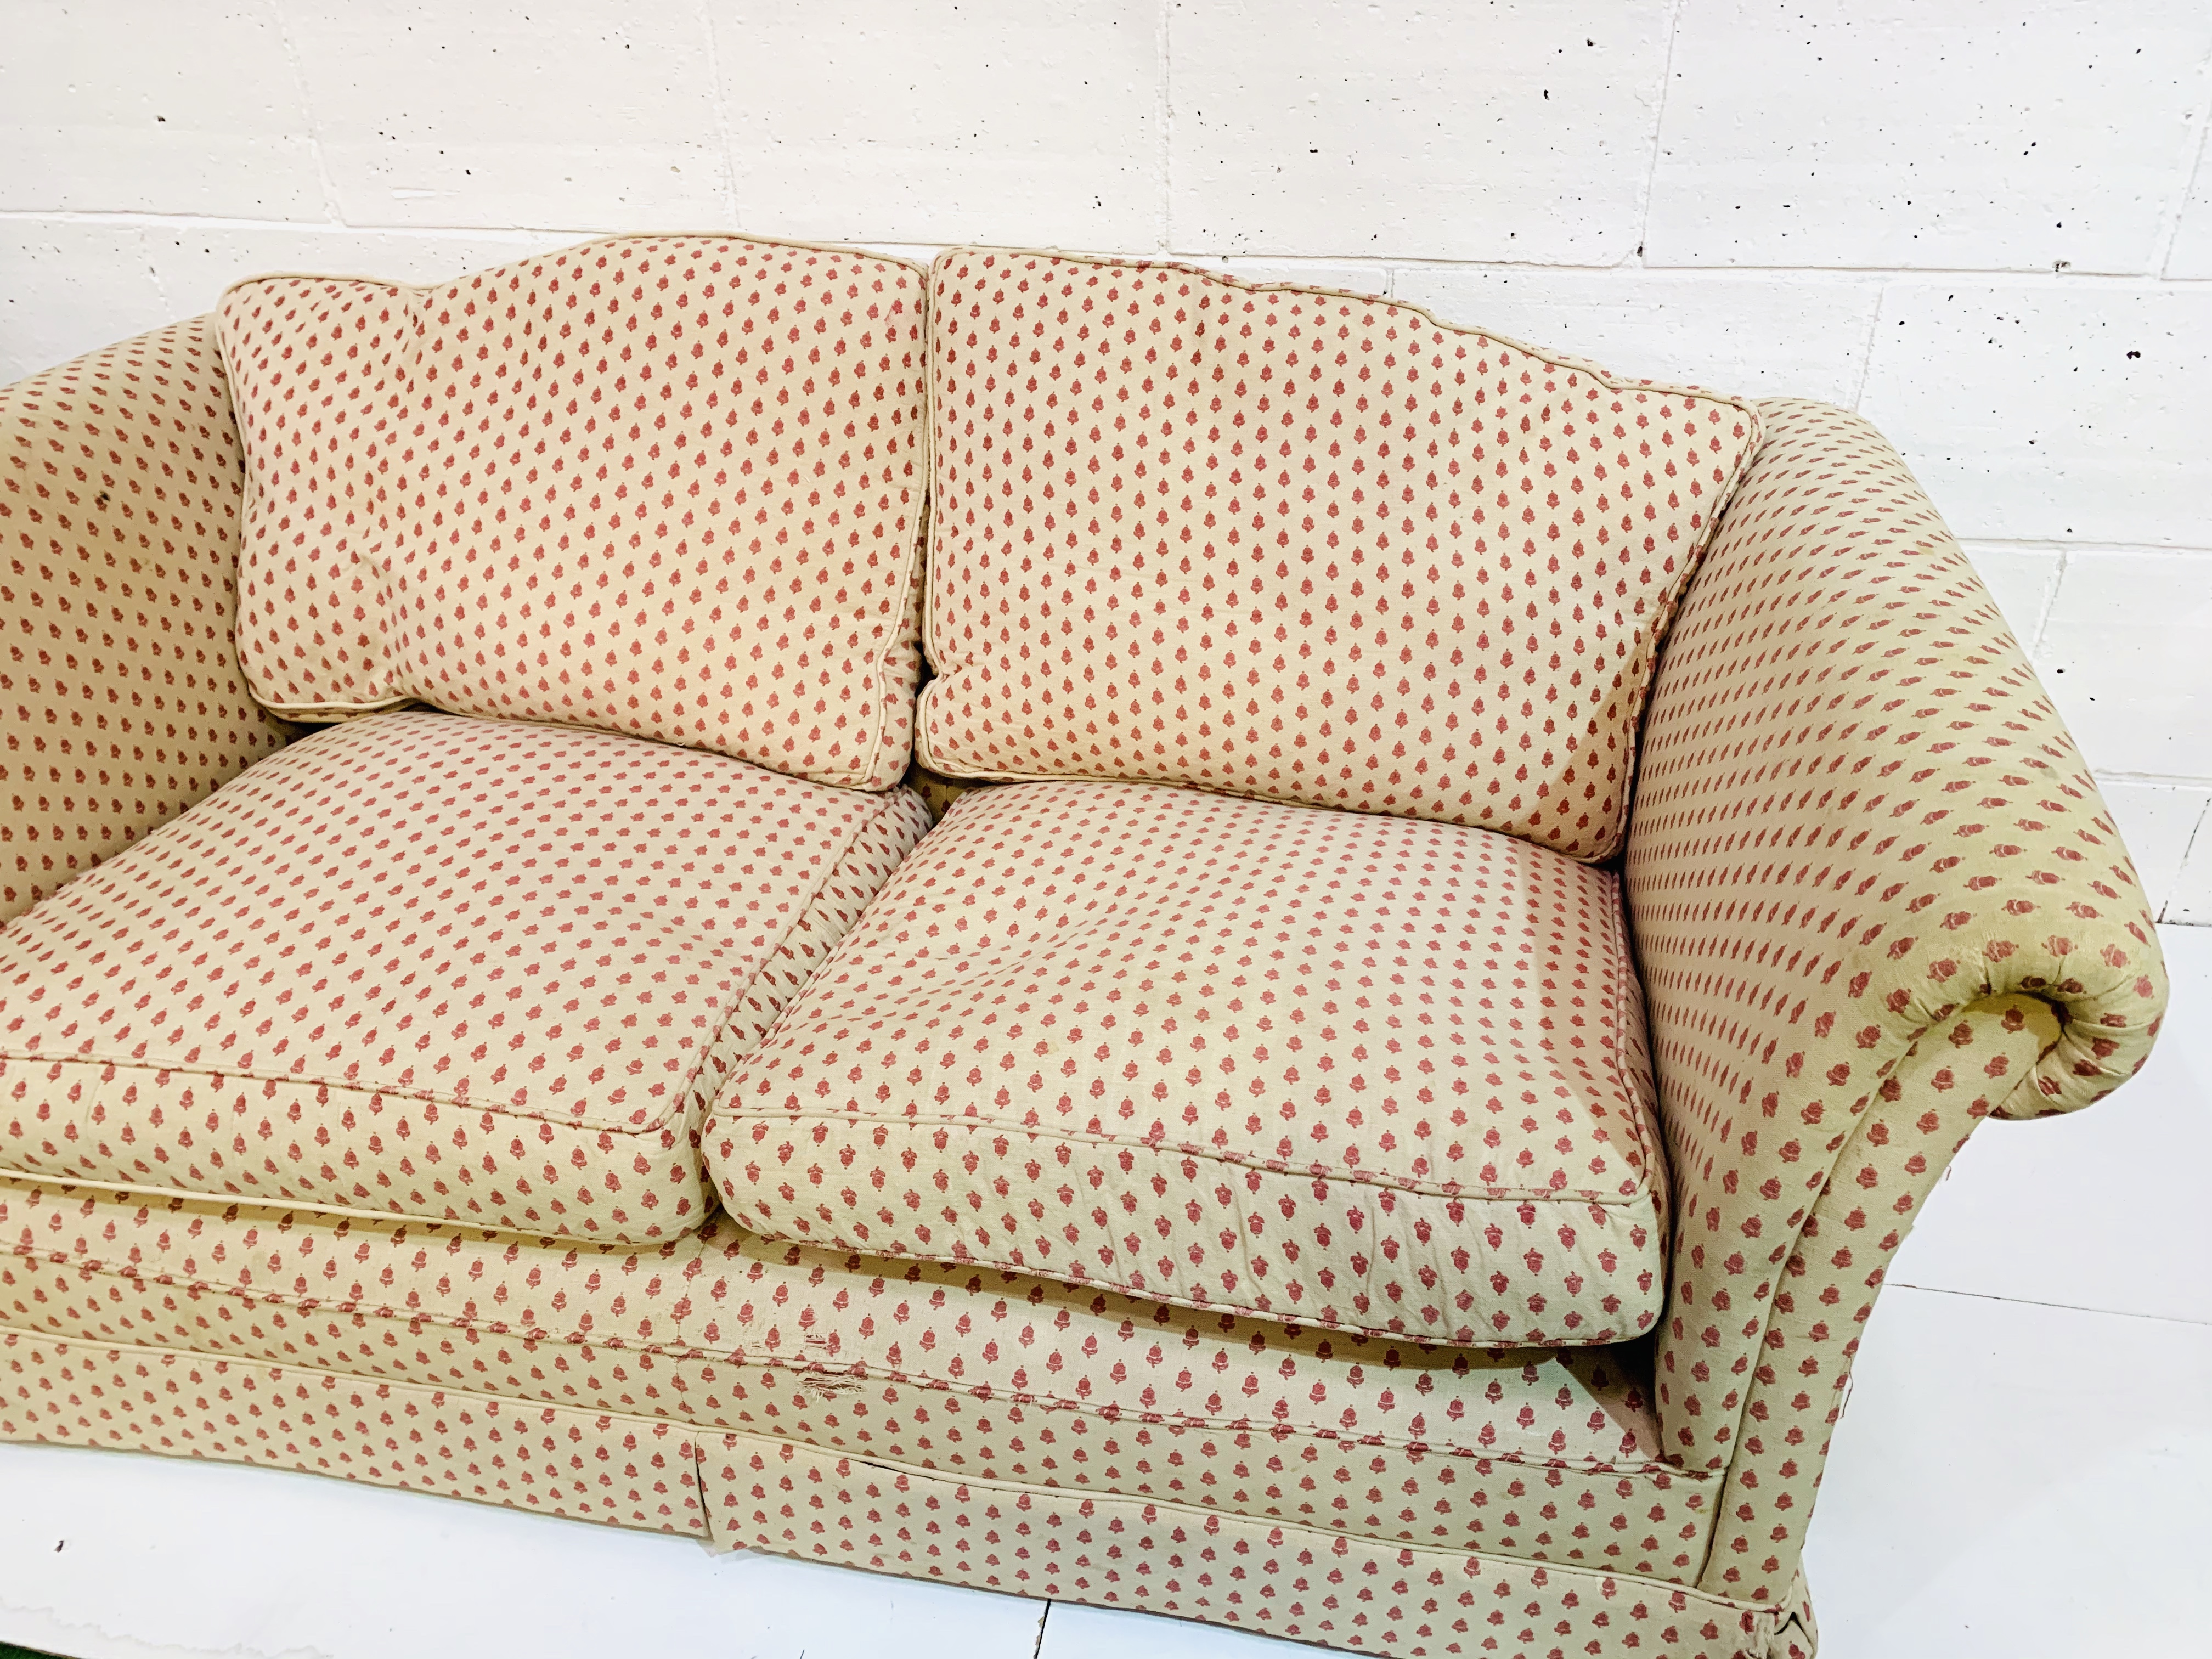 Cream and pink upholstered sofa withfeather-filled cushions. - Image 4 of 4